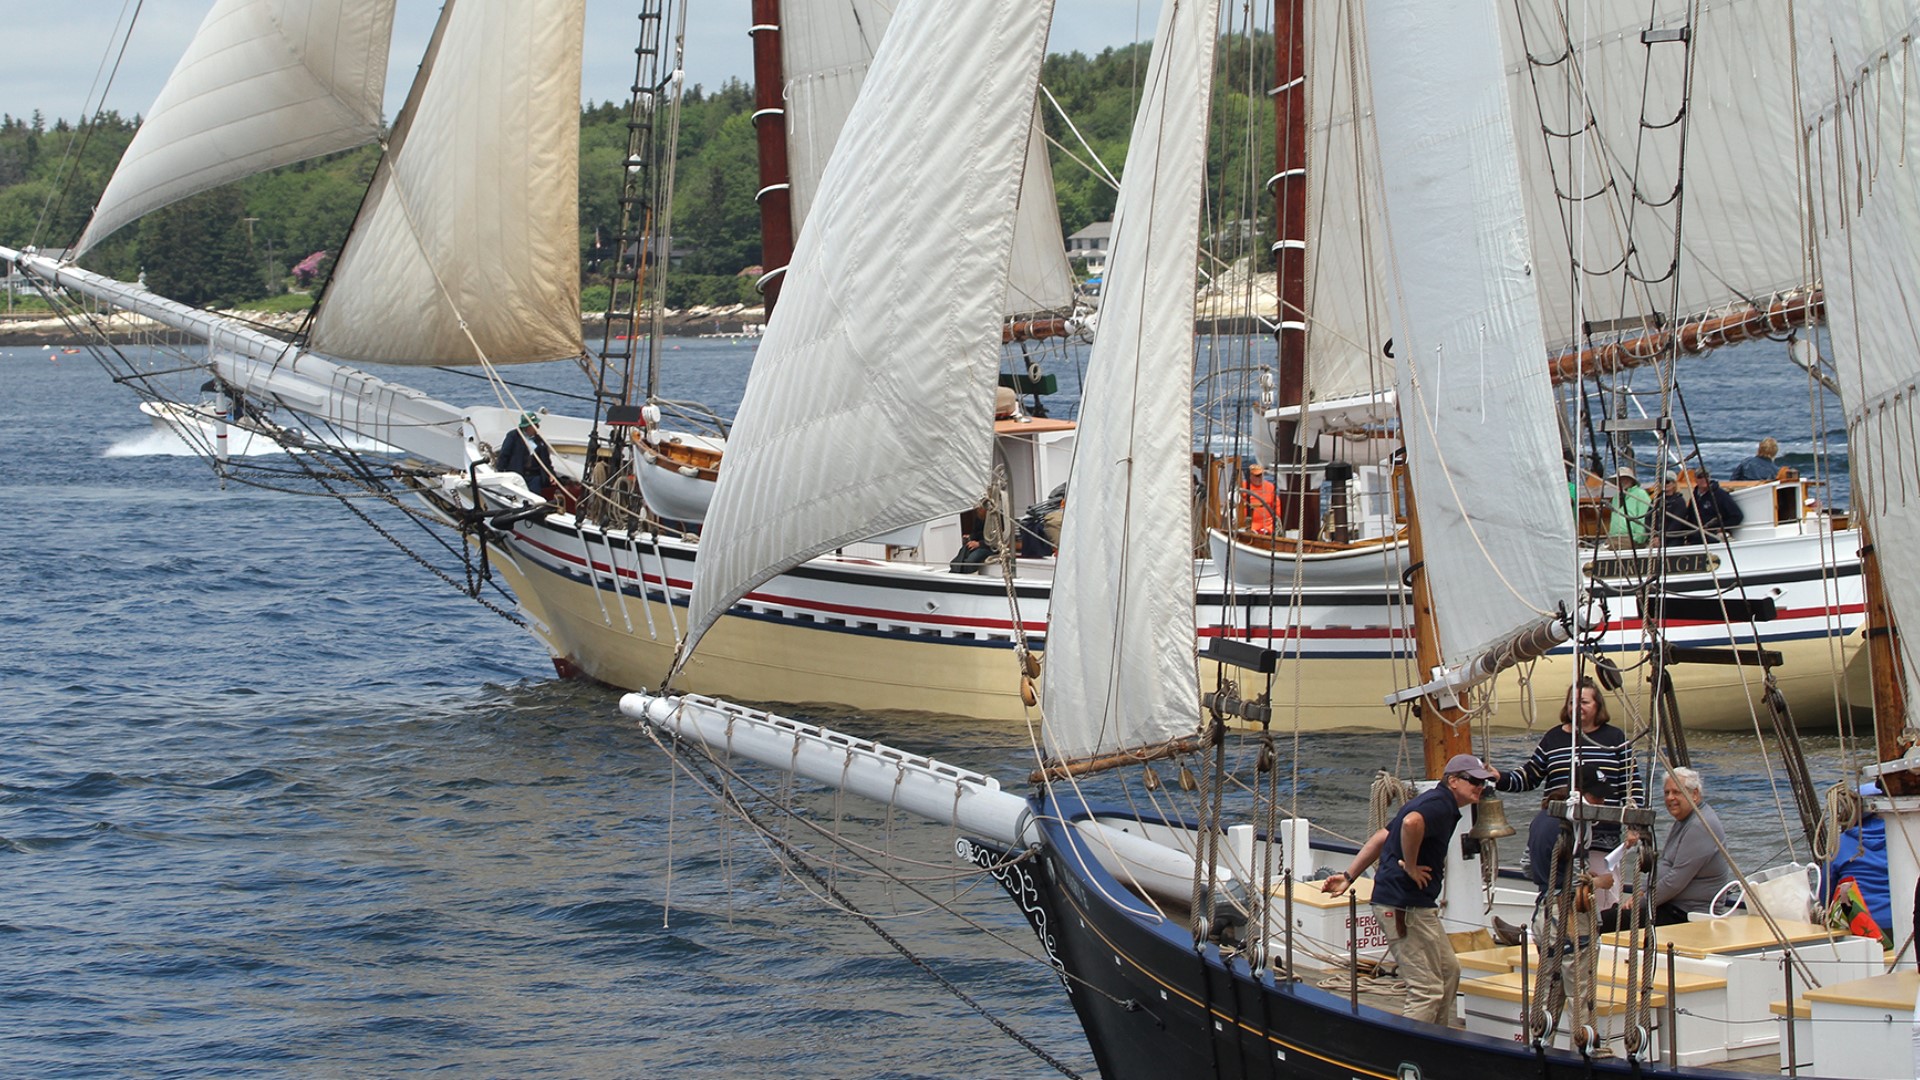 Join us for the weeklong event from June 23 - 29 in Boothbay Harbor.